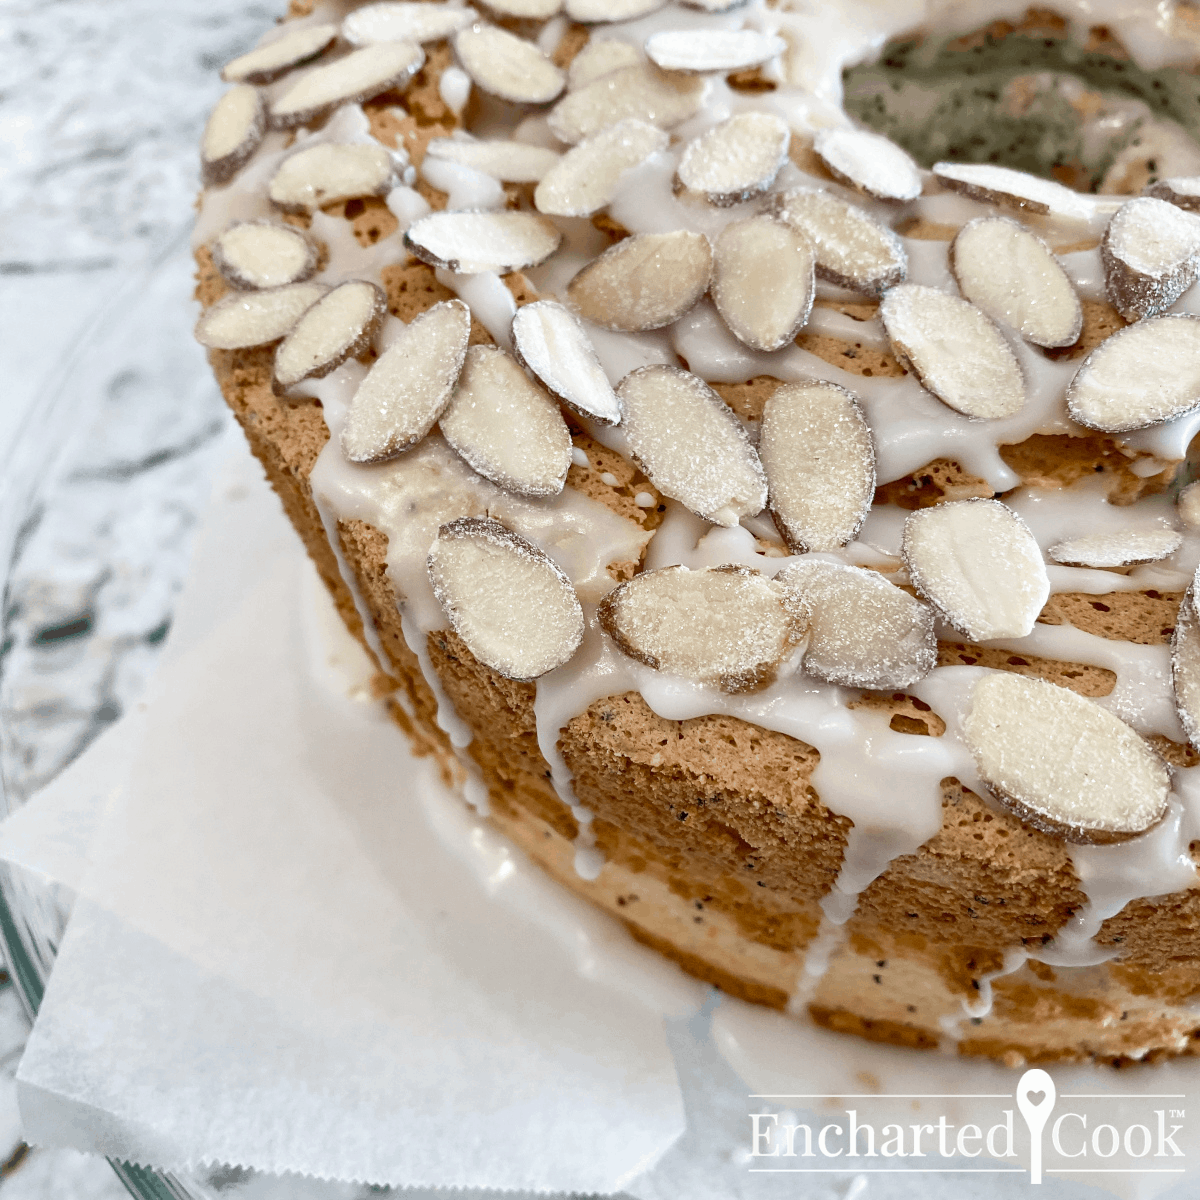 Drizzle the cake with the glaze and sprinkle the almonds over the top of the cake.